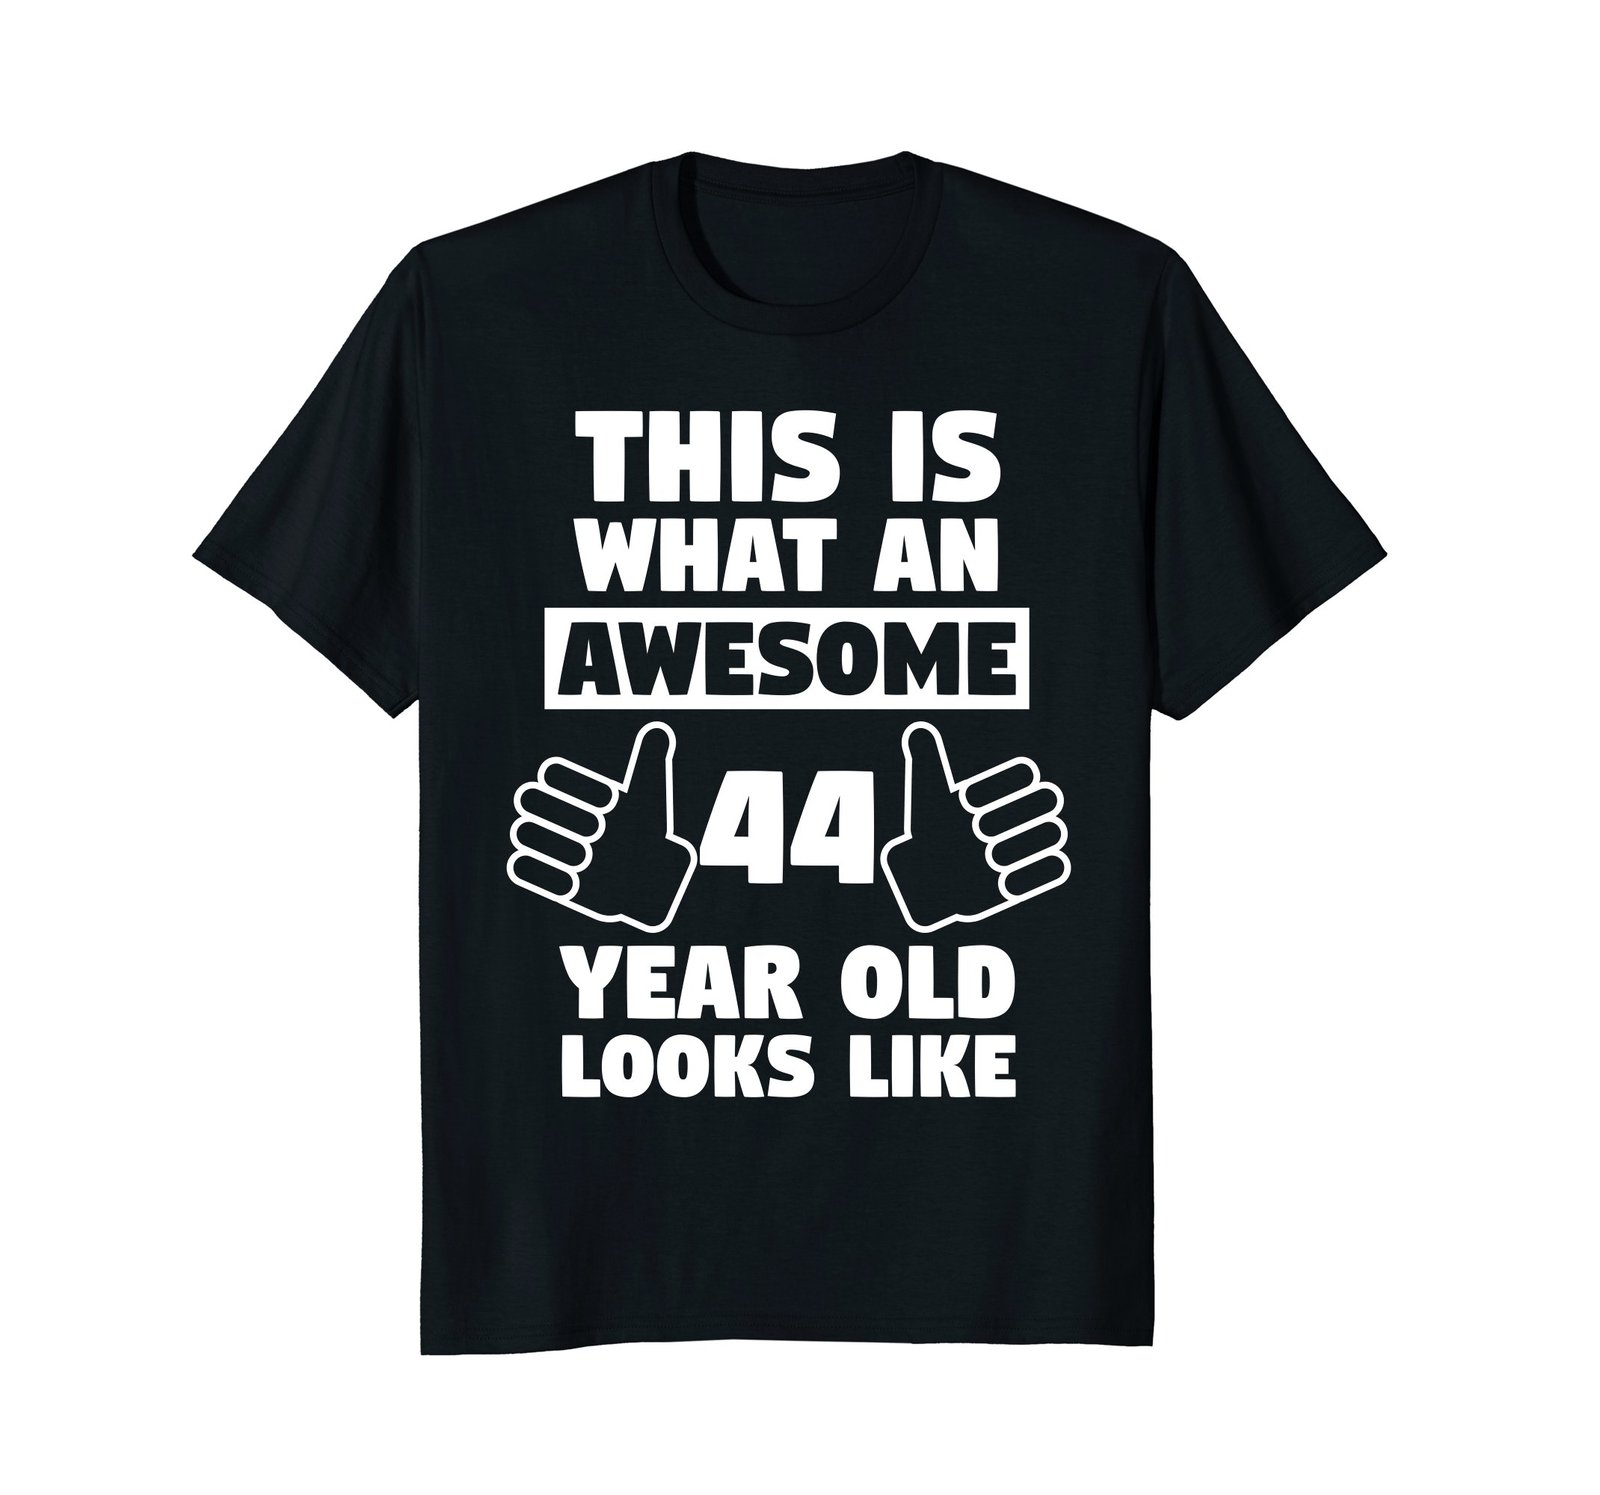 Awesome 44 Year Old Birthday Gift Funny 44th Birthday Shirt - T-Shirts ...